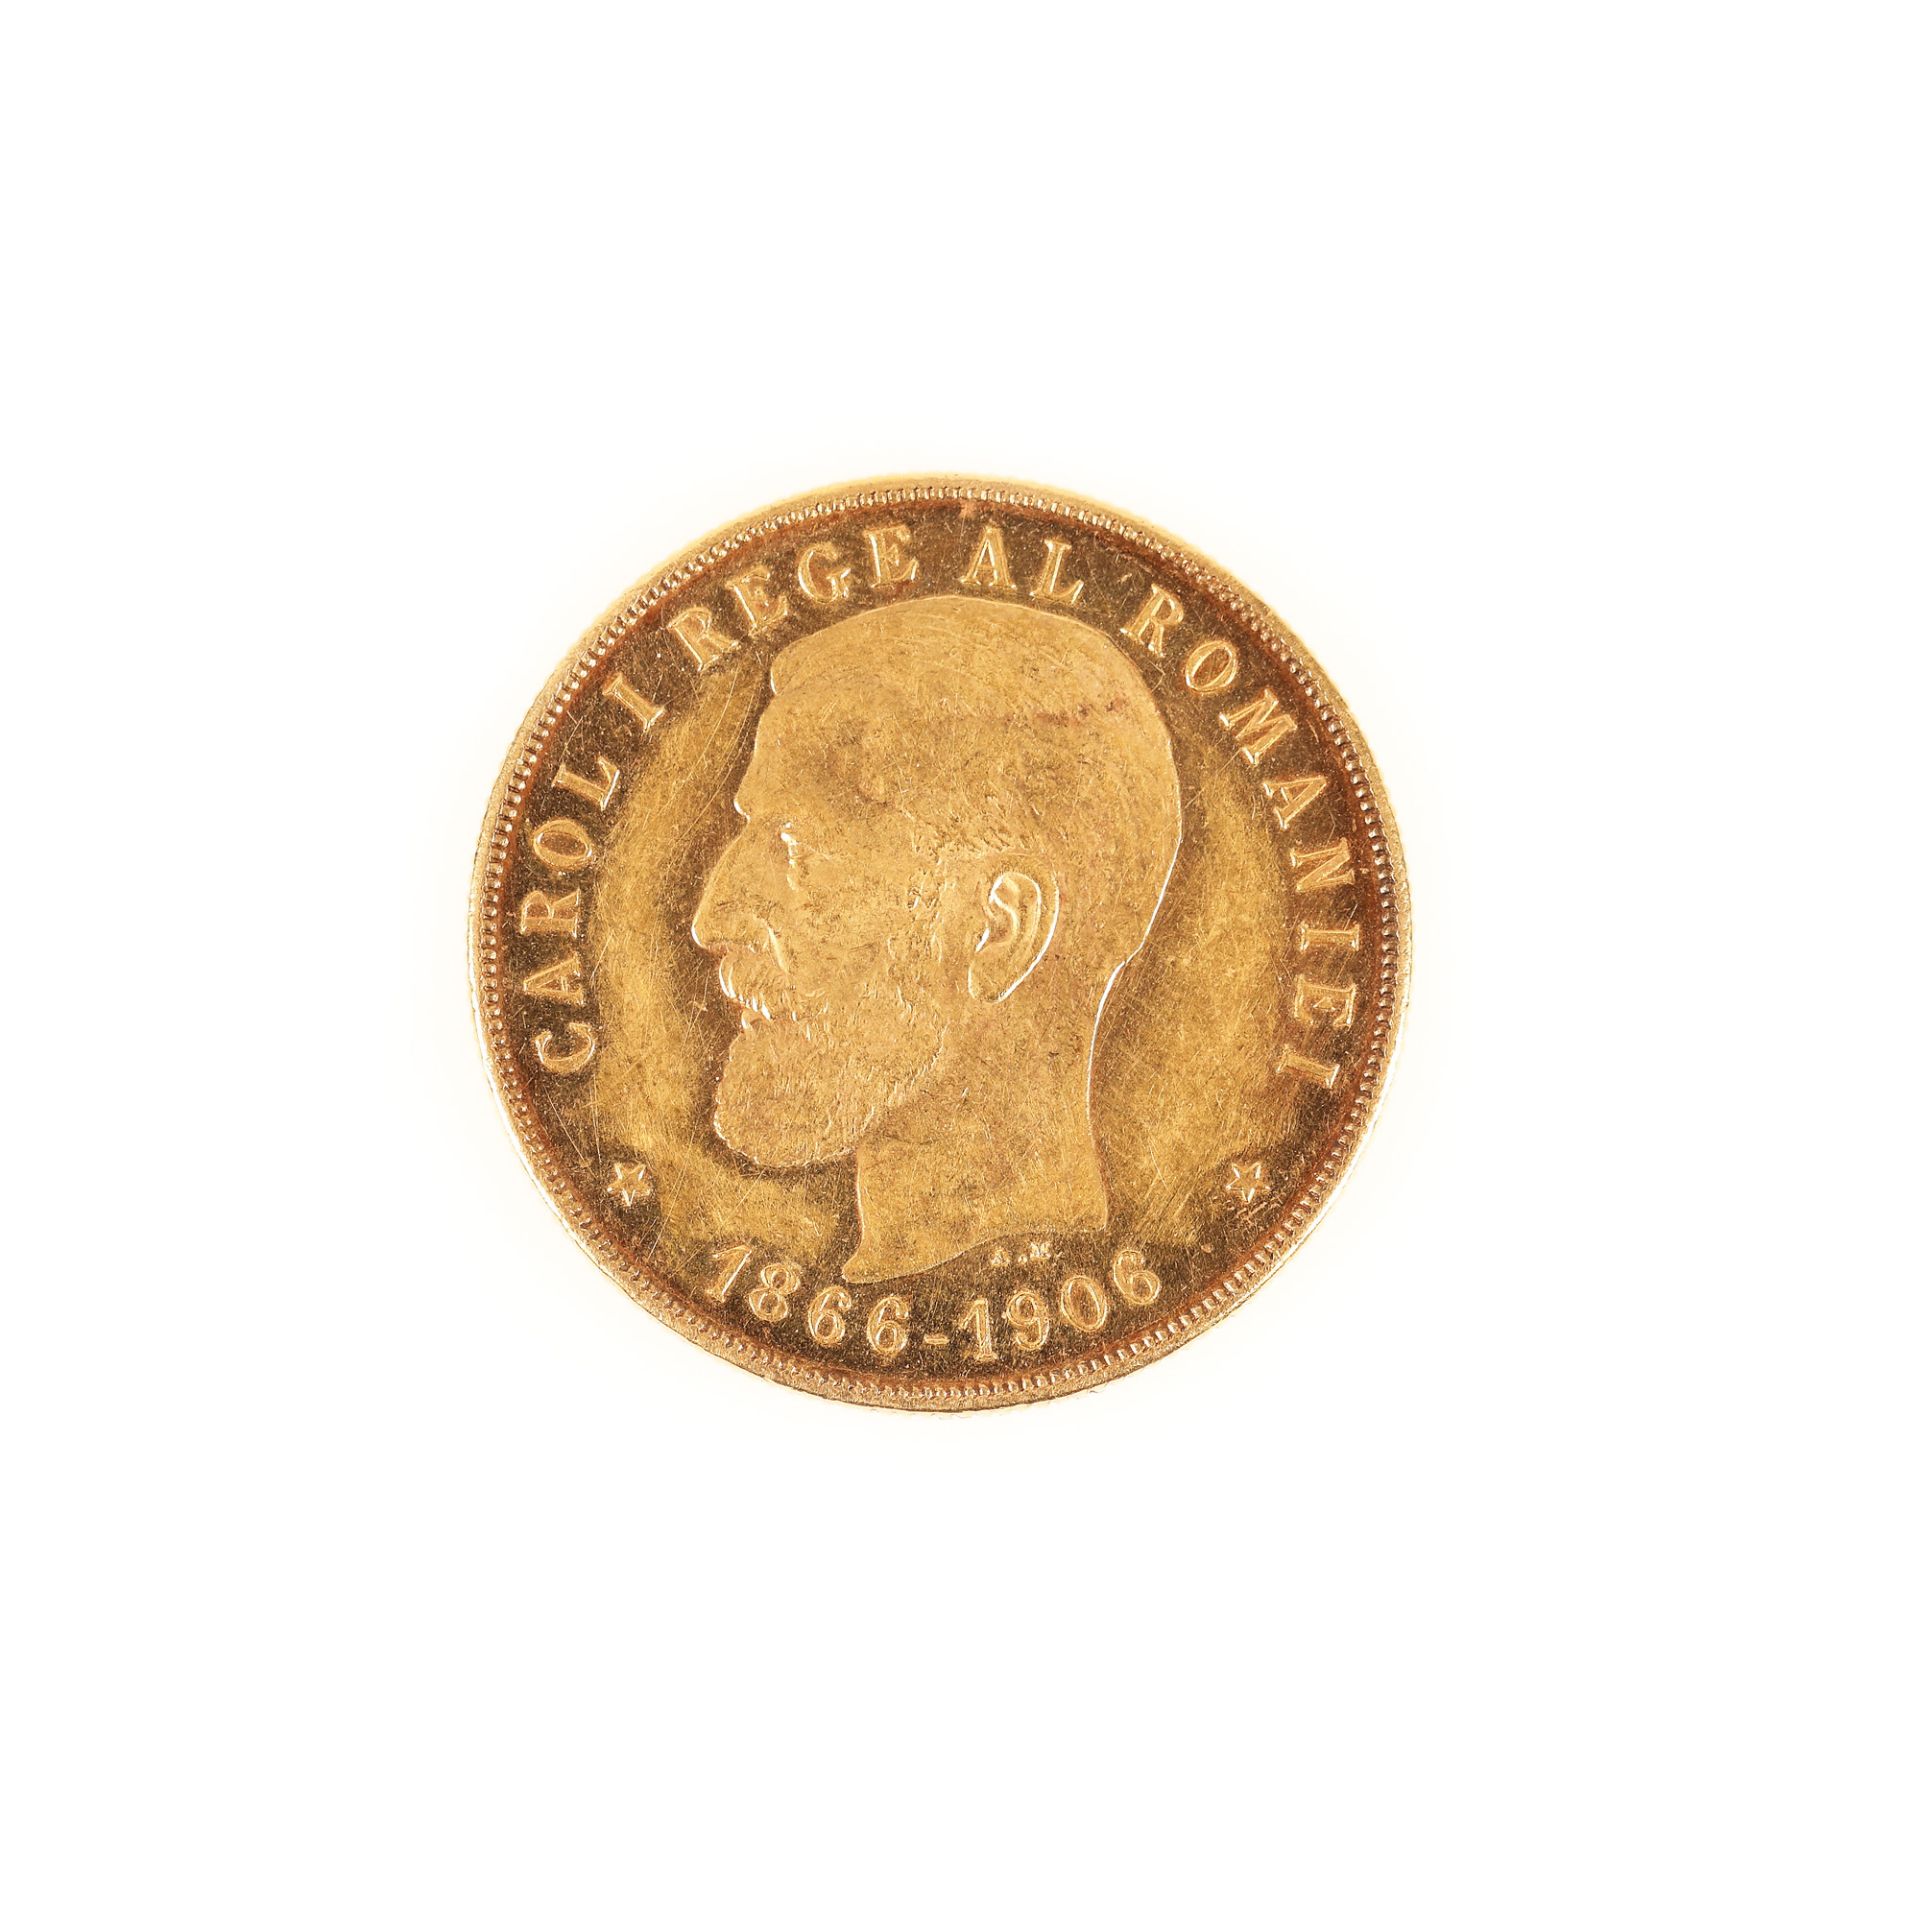 100 Lei 1906 coin, gold - Image 2 of 3